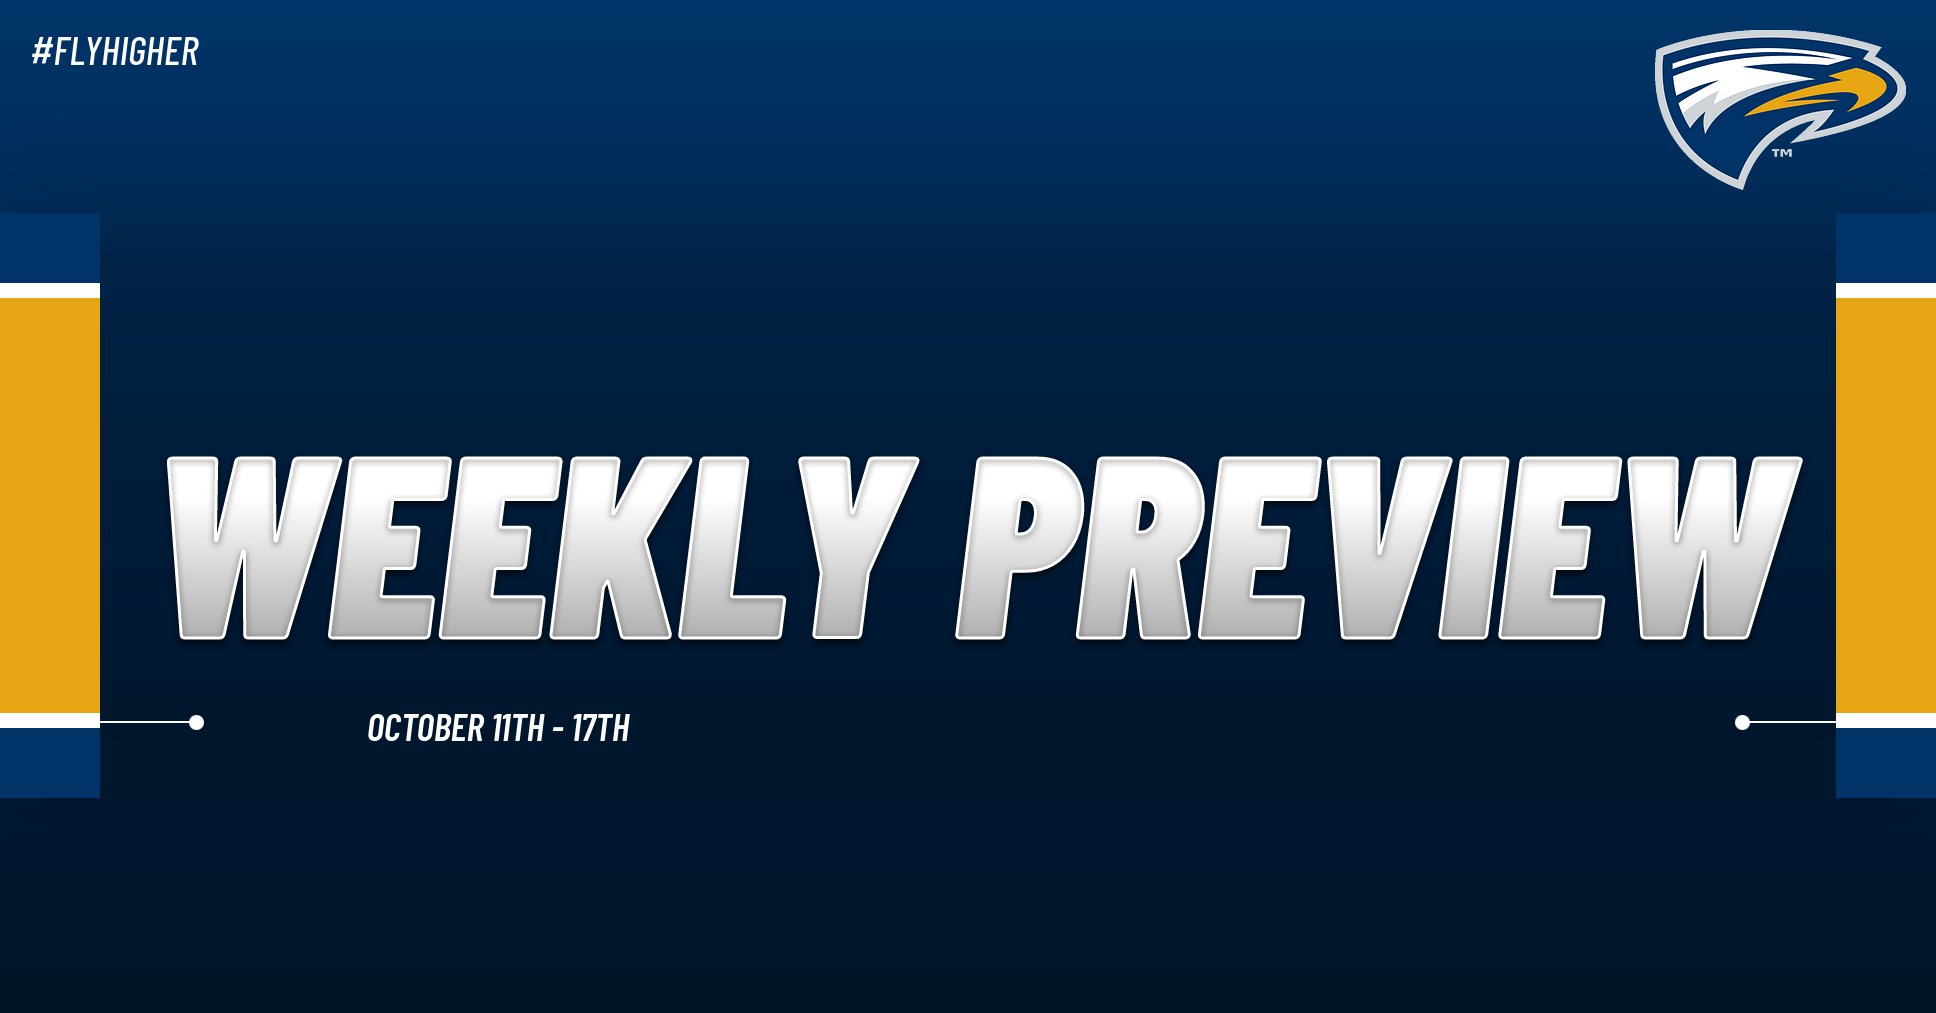 Emory Athletics Weekly Preview: 10/11 - 10/17